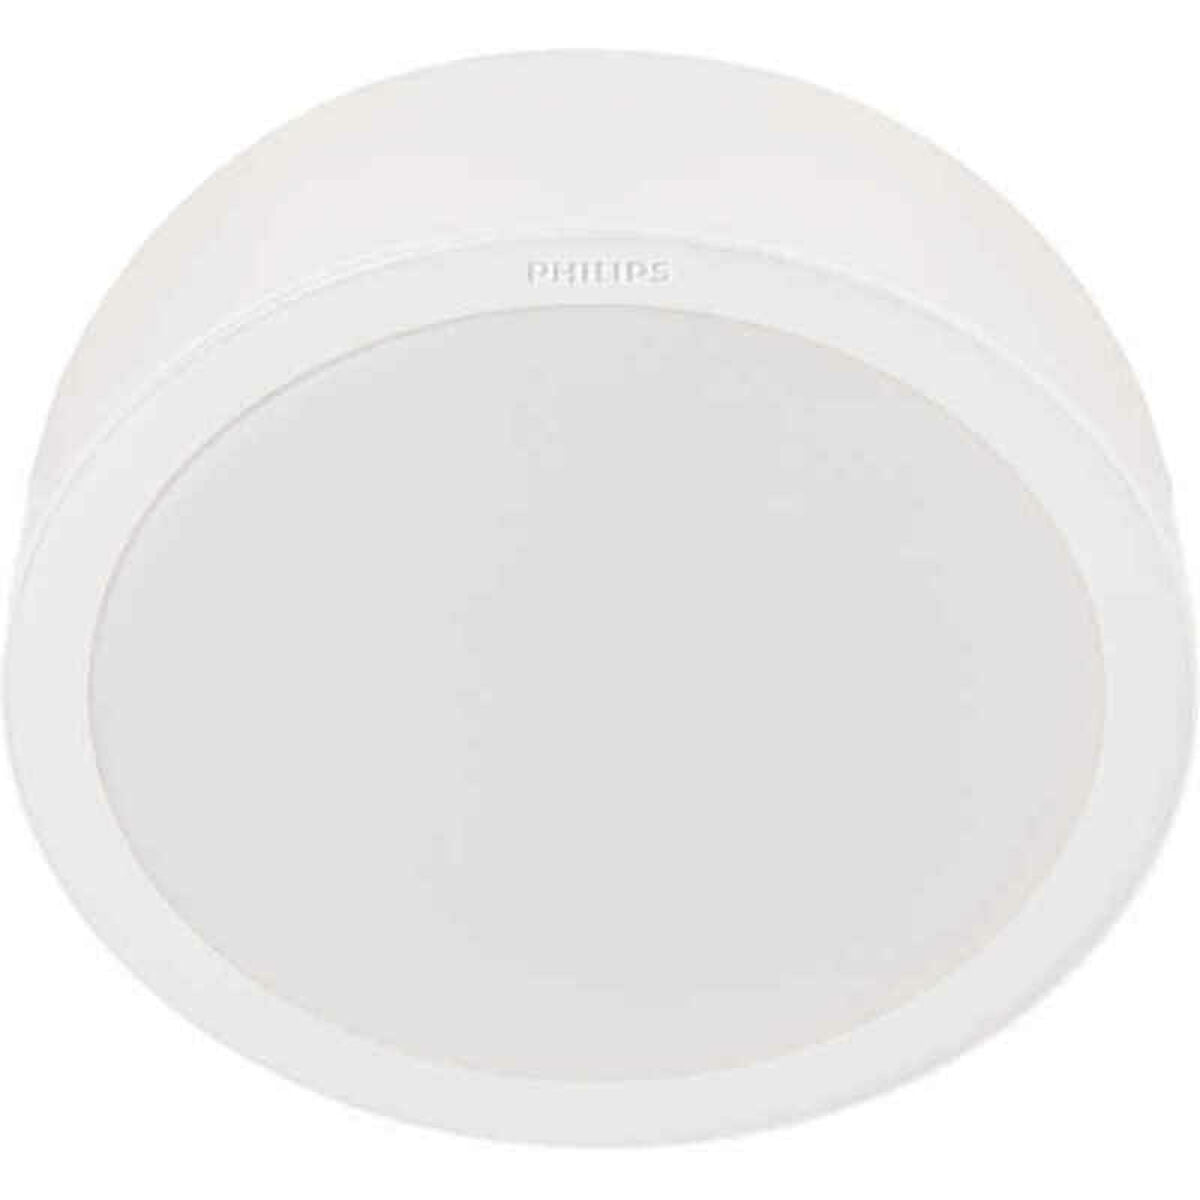 Led-downlights Philips Downlight 1300 lm 17 W (4000 K)